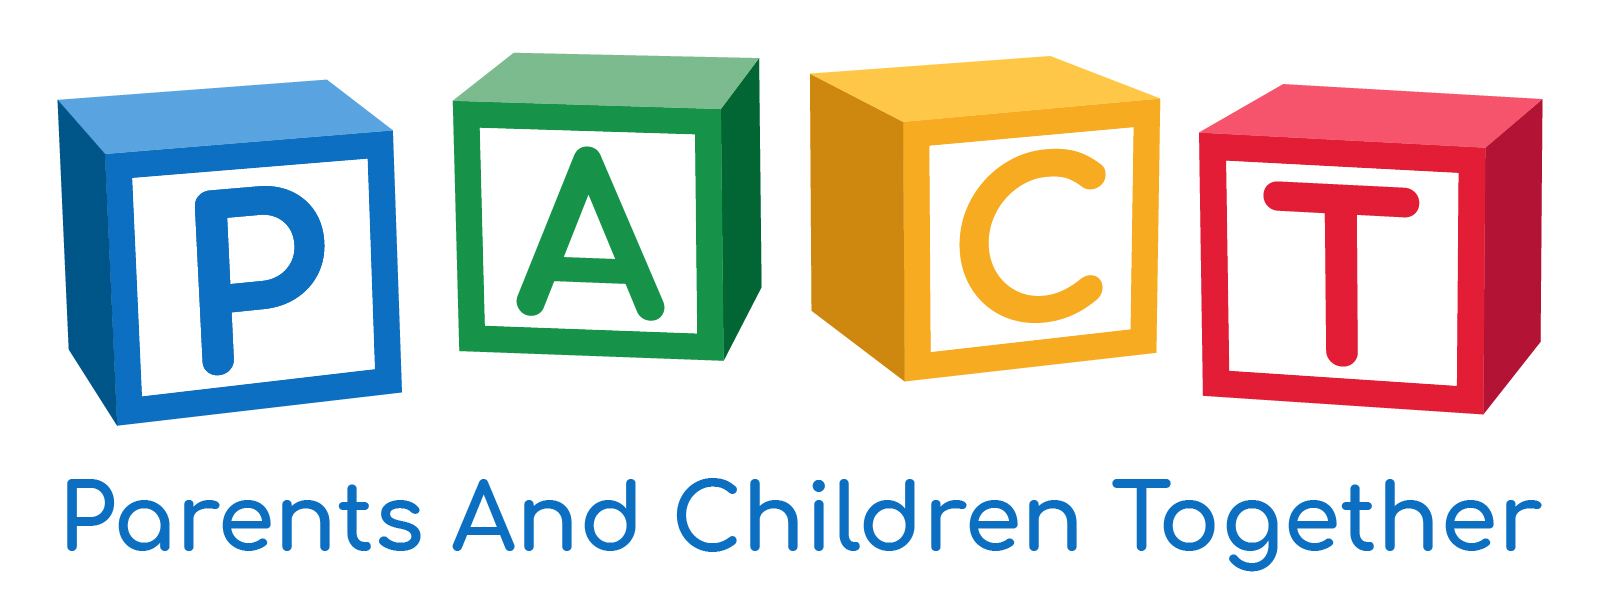 logo for Parents and Children Together